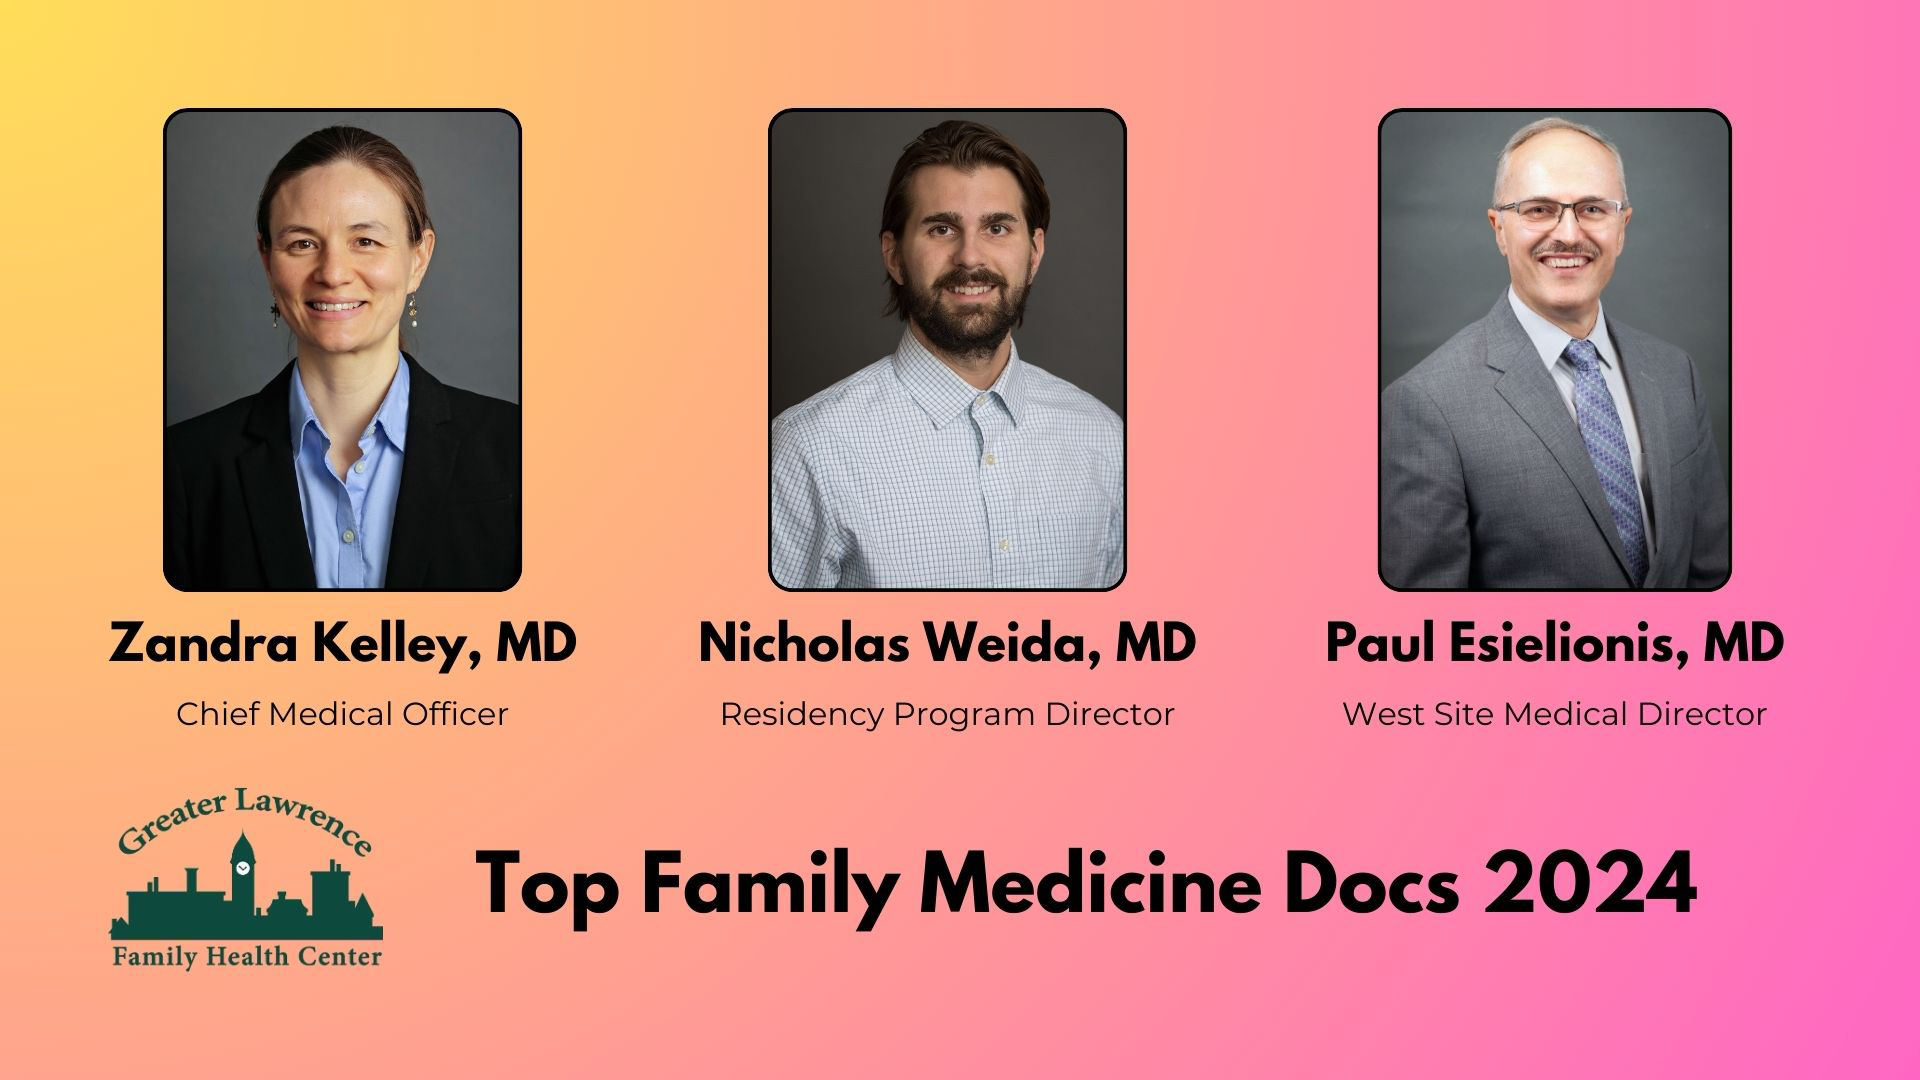 Northshore Magazine named 3 GLFHC physicians as Top Docs in 2024. They are Zandra Kelley, MD; Nicholas Weida, MD; and Paul Esielionis, MD.